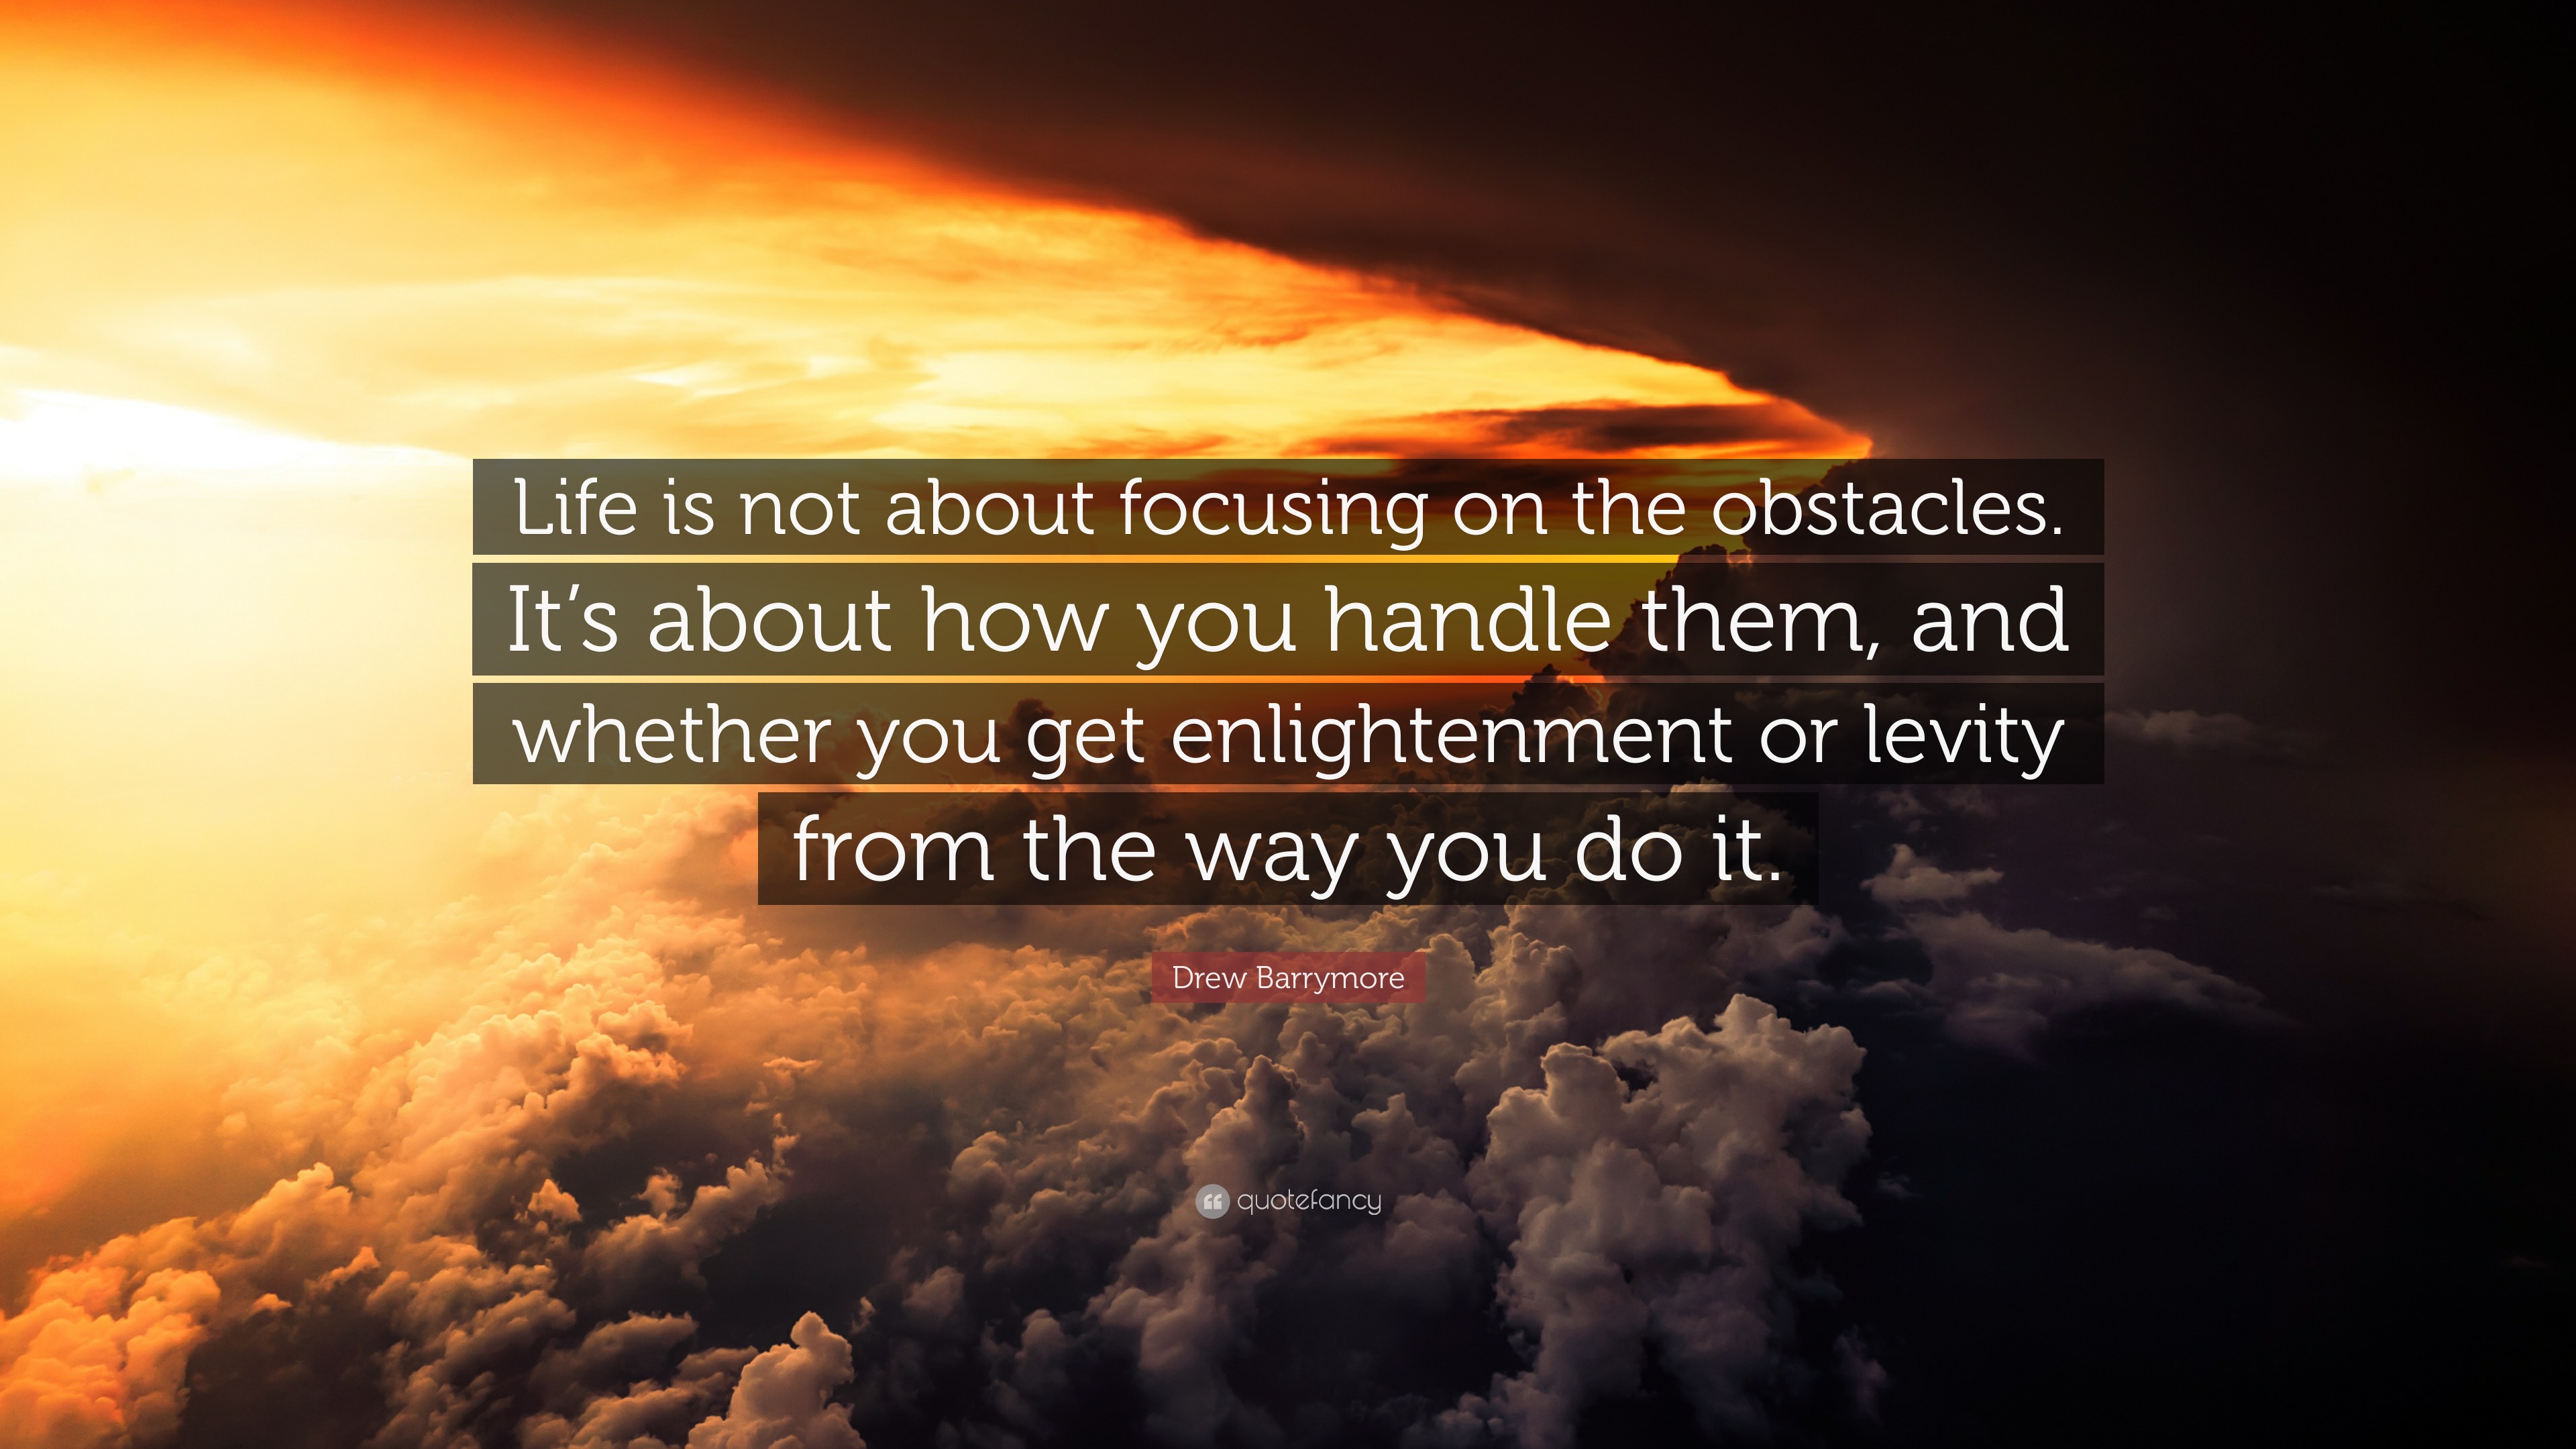 Drew Barrymore Quote: “Life is not about focusing on the obstacles. It ...